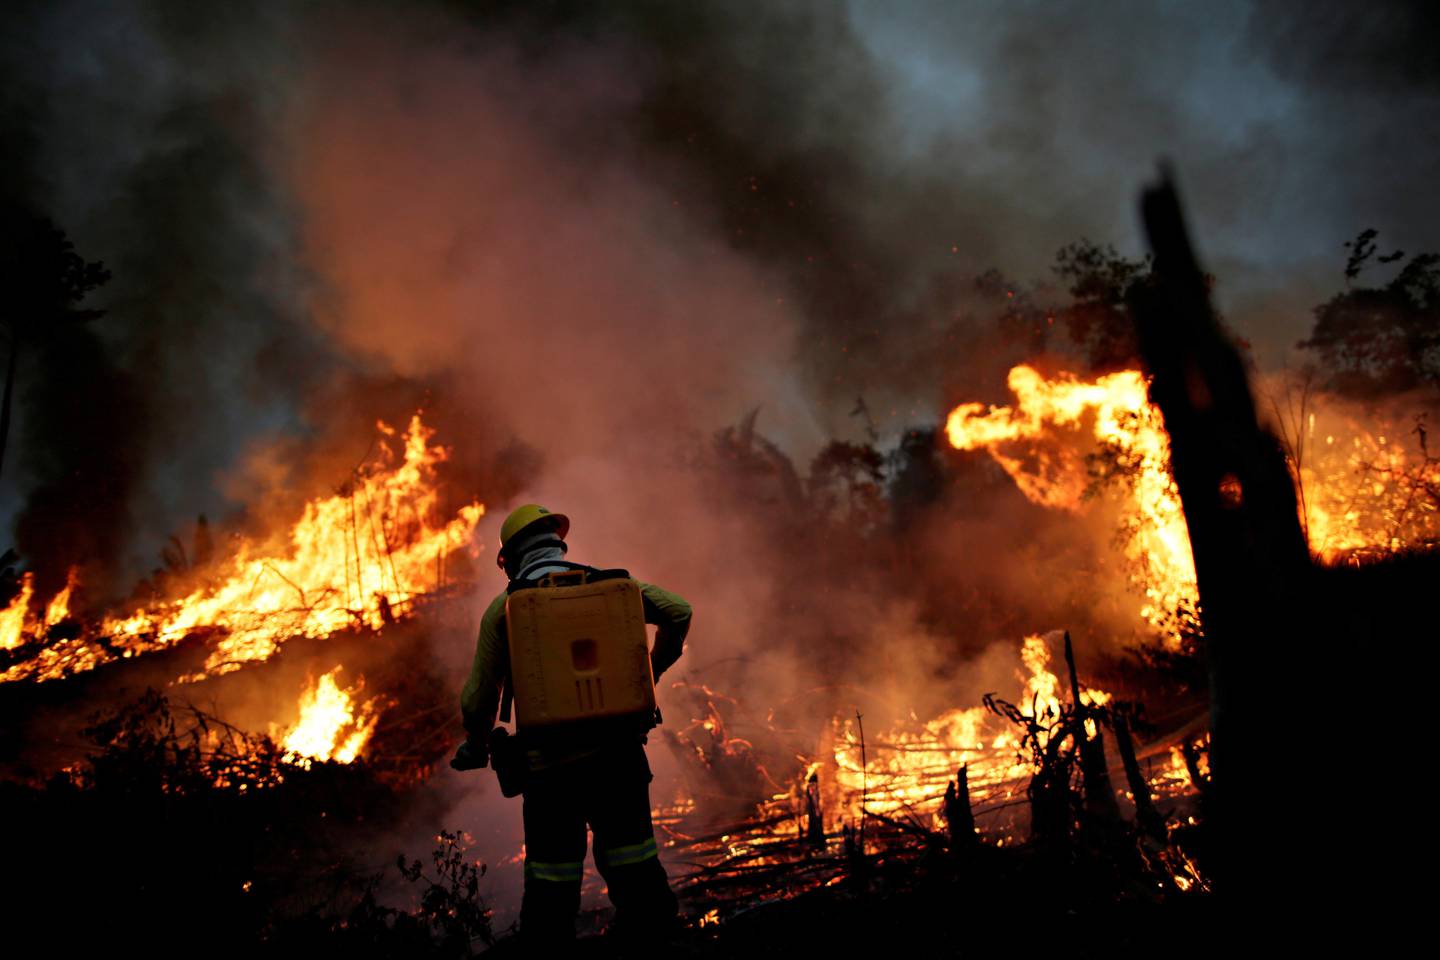 FILE PHOTO: A Brazilian Institute for the Environment and Renewable Natural Resources (IBAMA) fire brigade member attempts to control a fire in a tract of the Amazon jungle in Apui, Amazonas State, Brazil, August 11, 2020. REUTERS/Ueslei Marcelino/File Photo